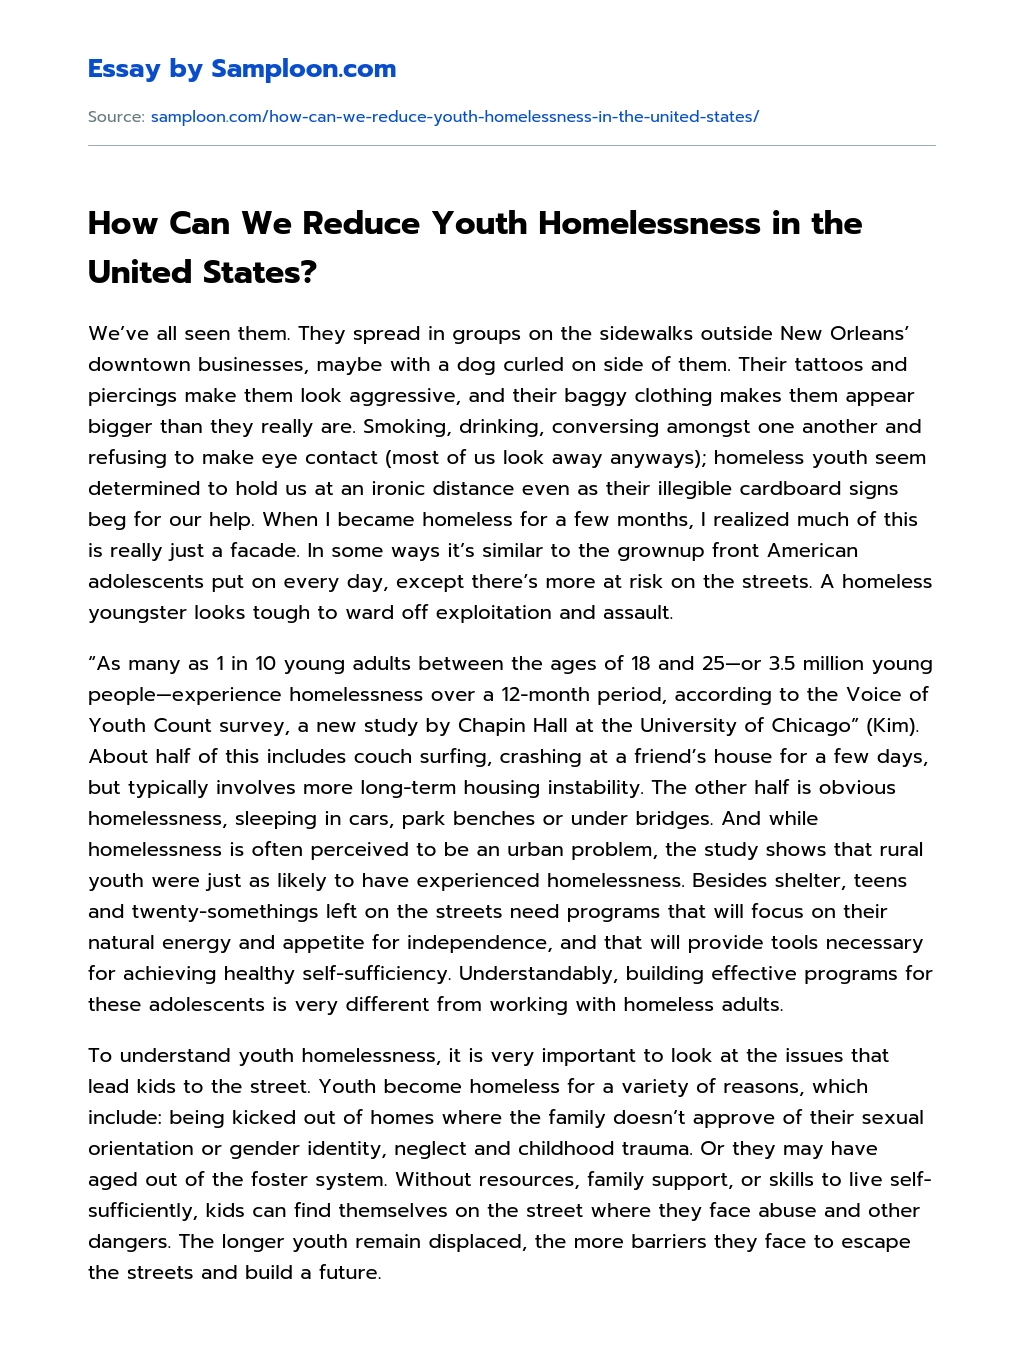 How Can We Reduce Youth Homelessness in the United States? essay